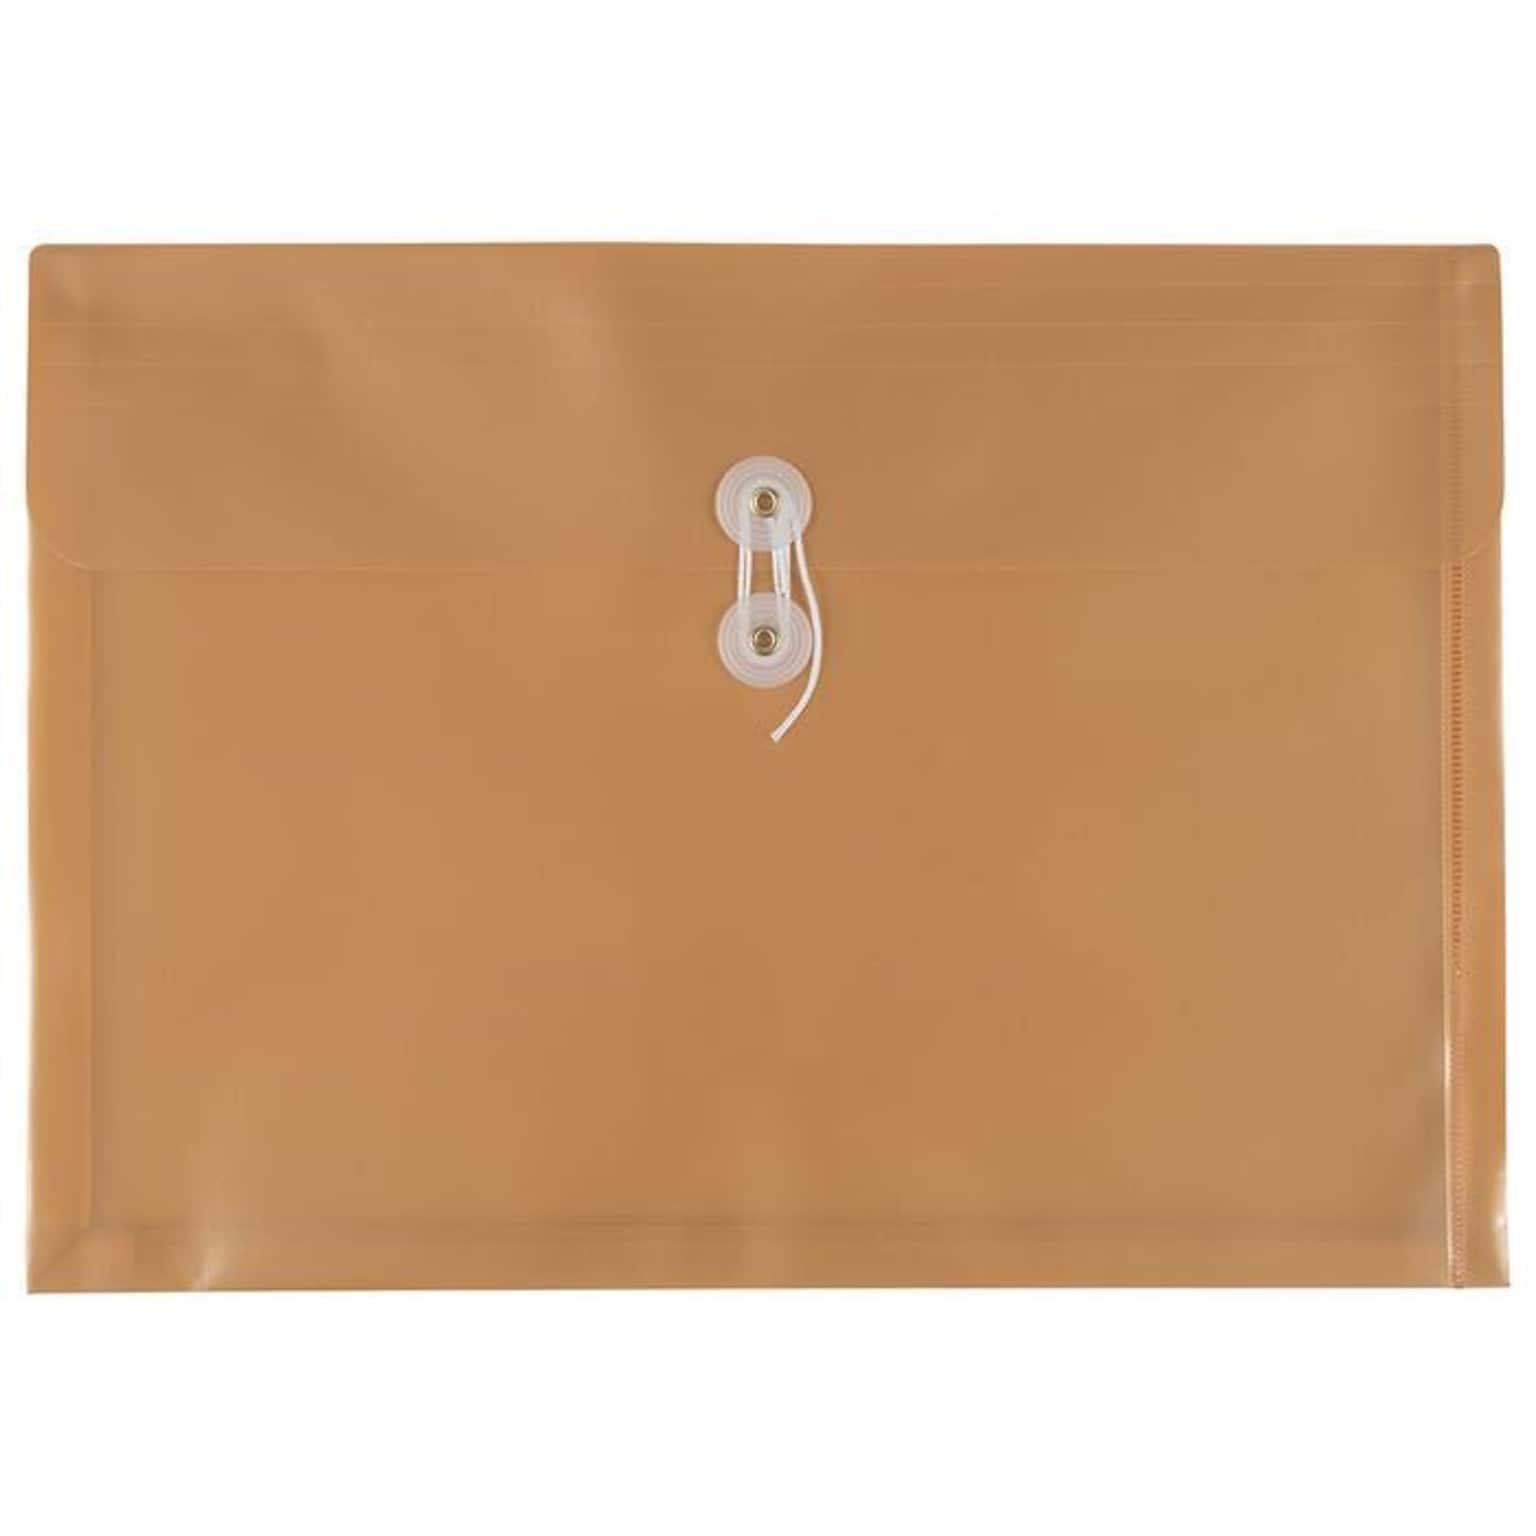 JAM PAPER Plastic Envelopes with Button & String Tie Closure, Legal Booklet, 9 3/4 x 14 1/2, Gold, 12/Pack (235438983A)